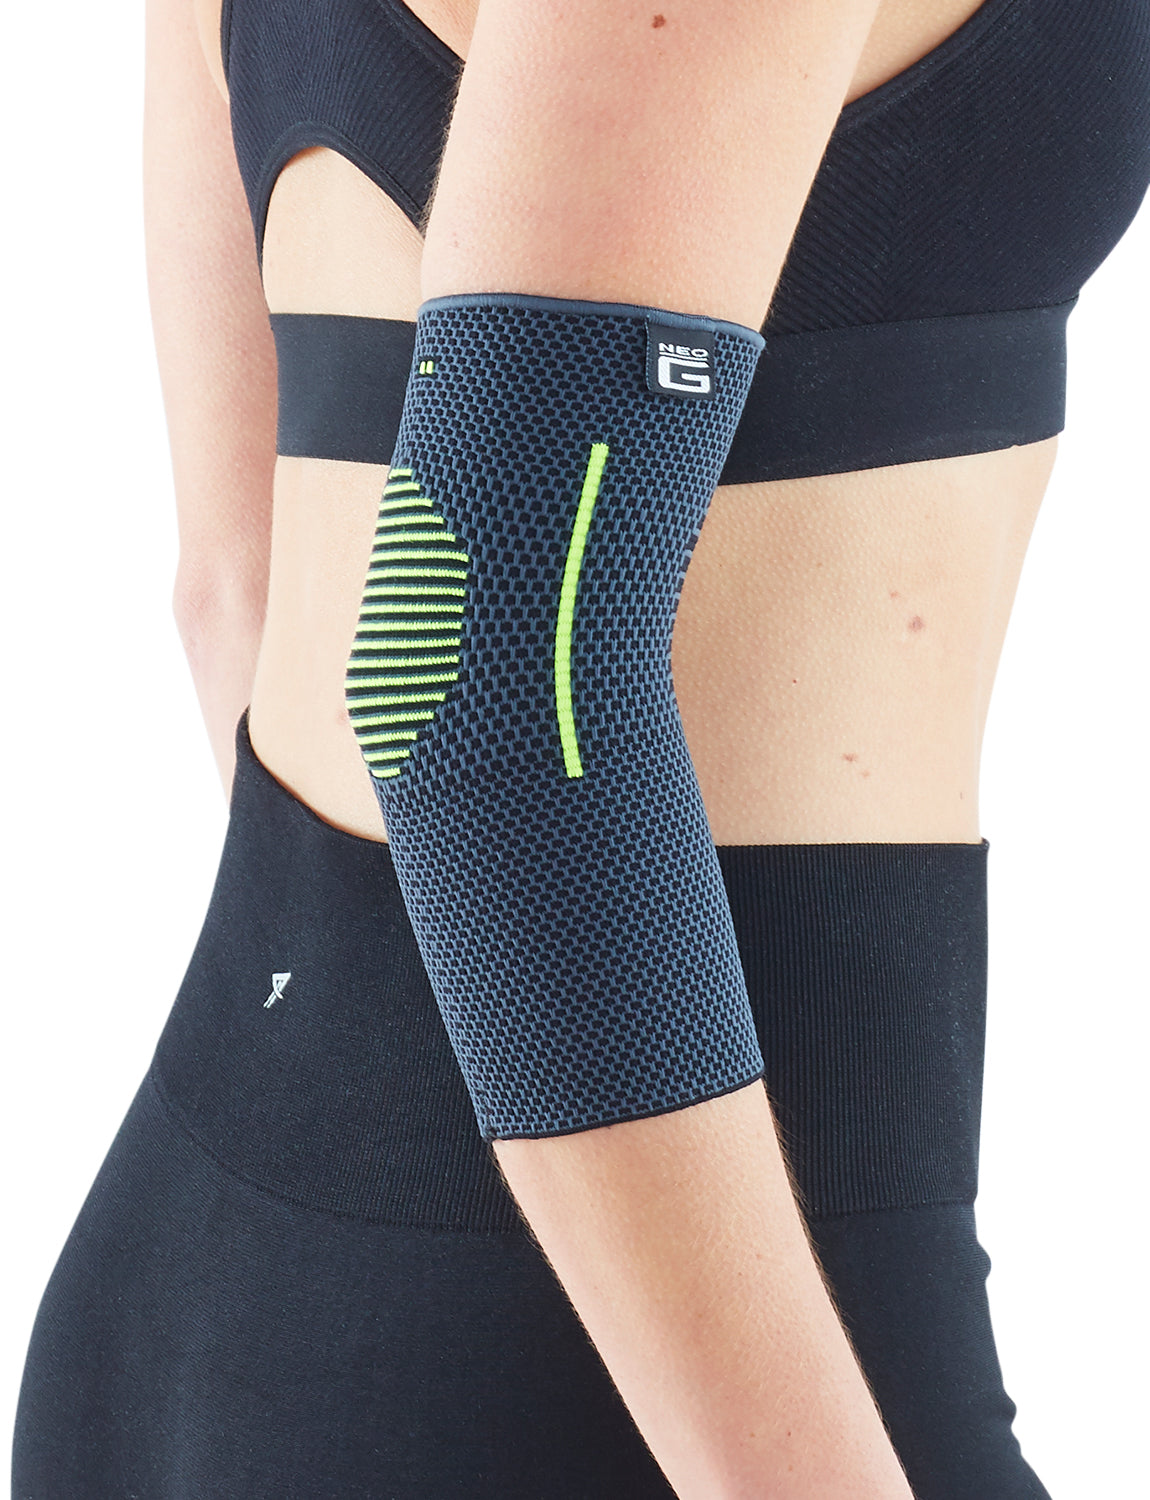 Bauerfeind Sports Elbow Brace and Injury Recovery